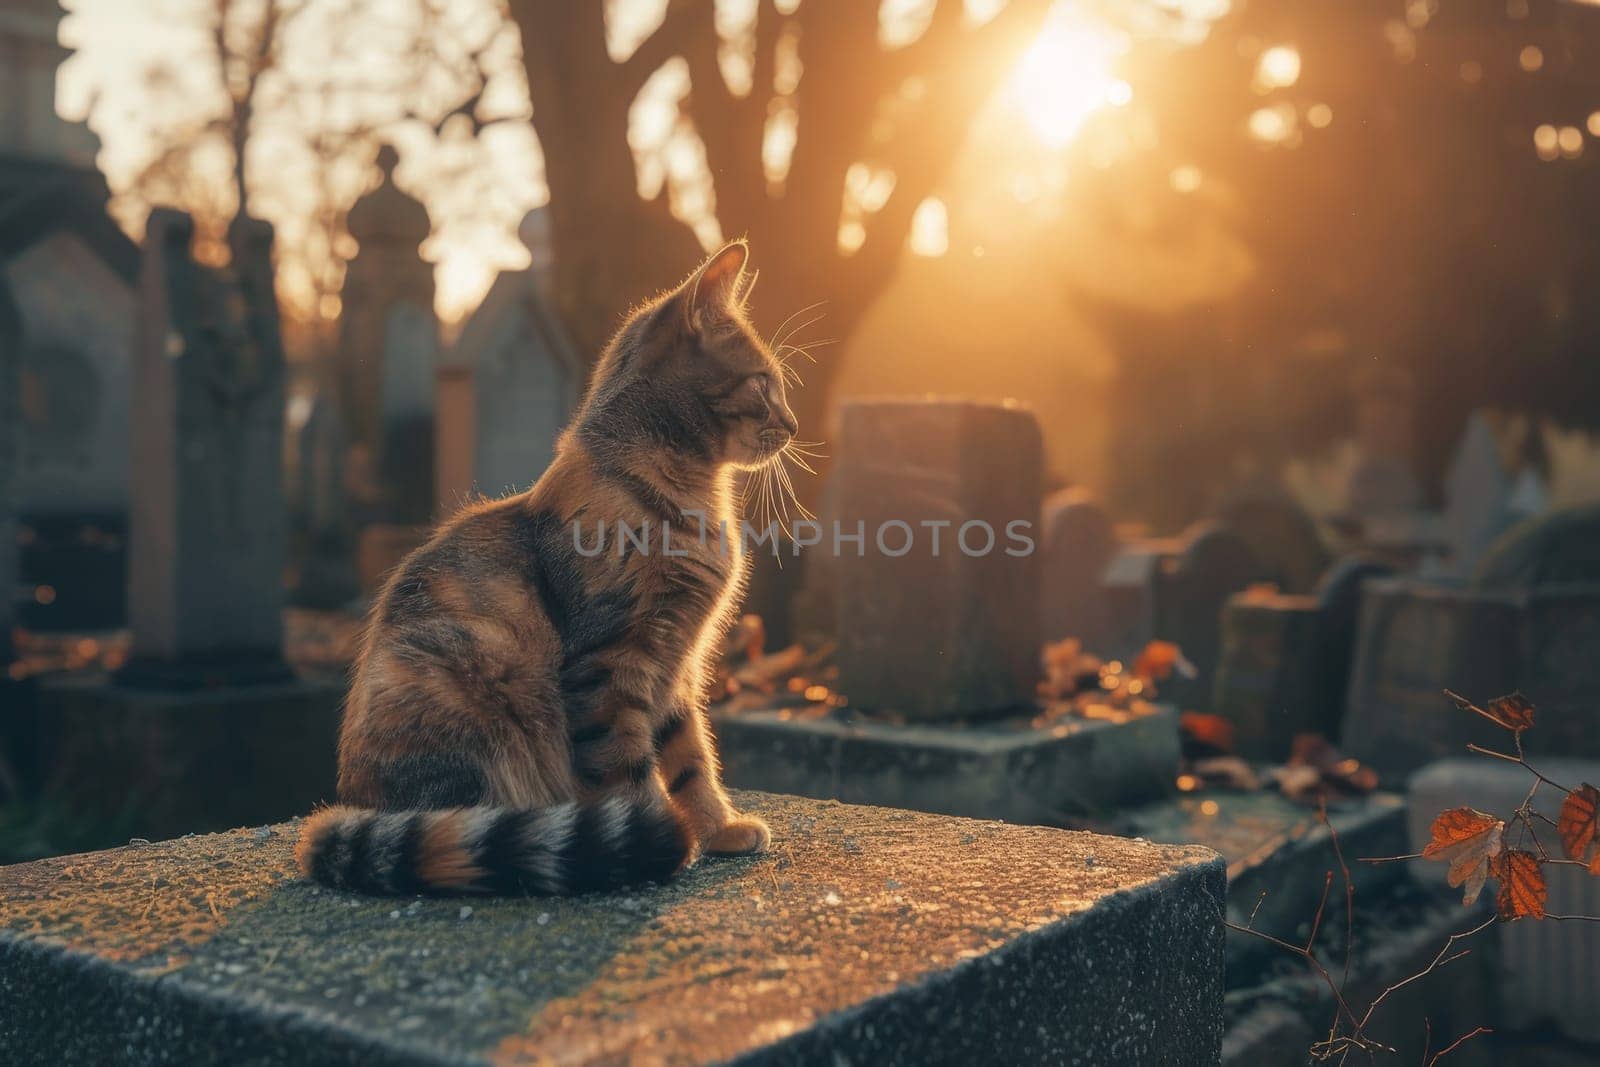 Cat in cemetery, A cat sitting next to a grave in a cemetery, In remembrance of a pet.